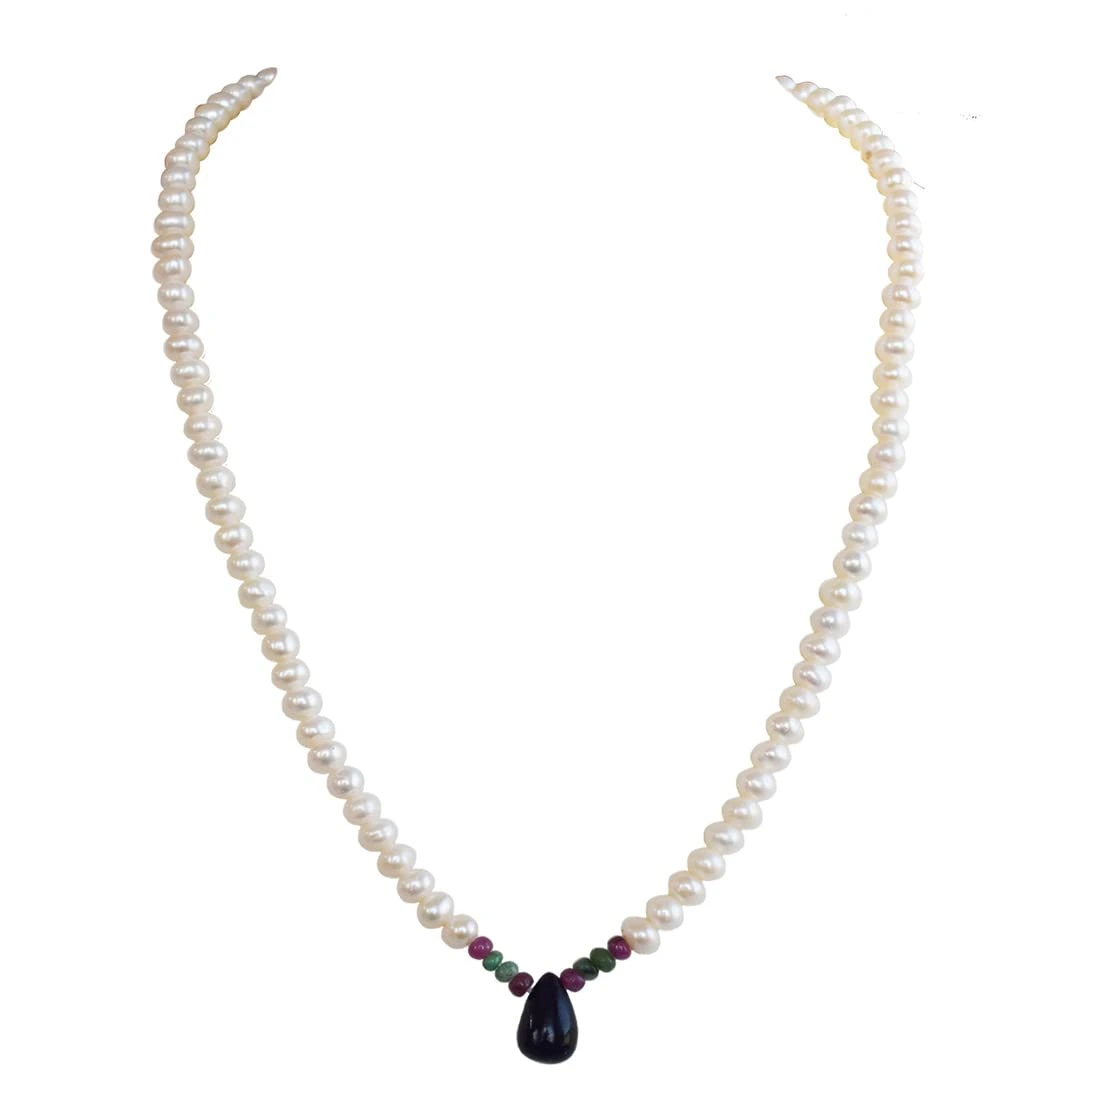 Drop Sapphire, Emerald, Ruby Beads & Rice Pearl Necklace (SN1016)